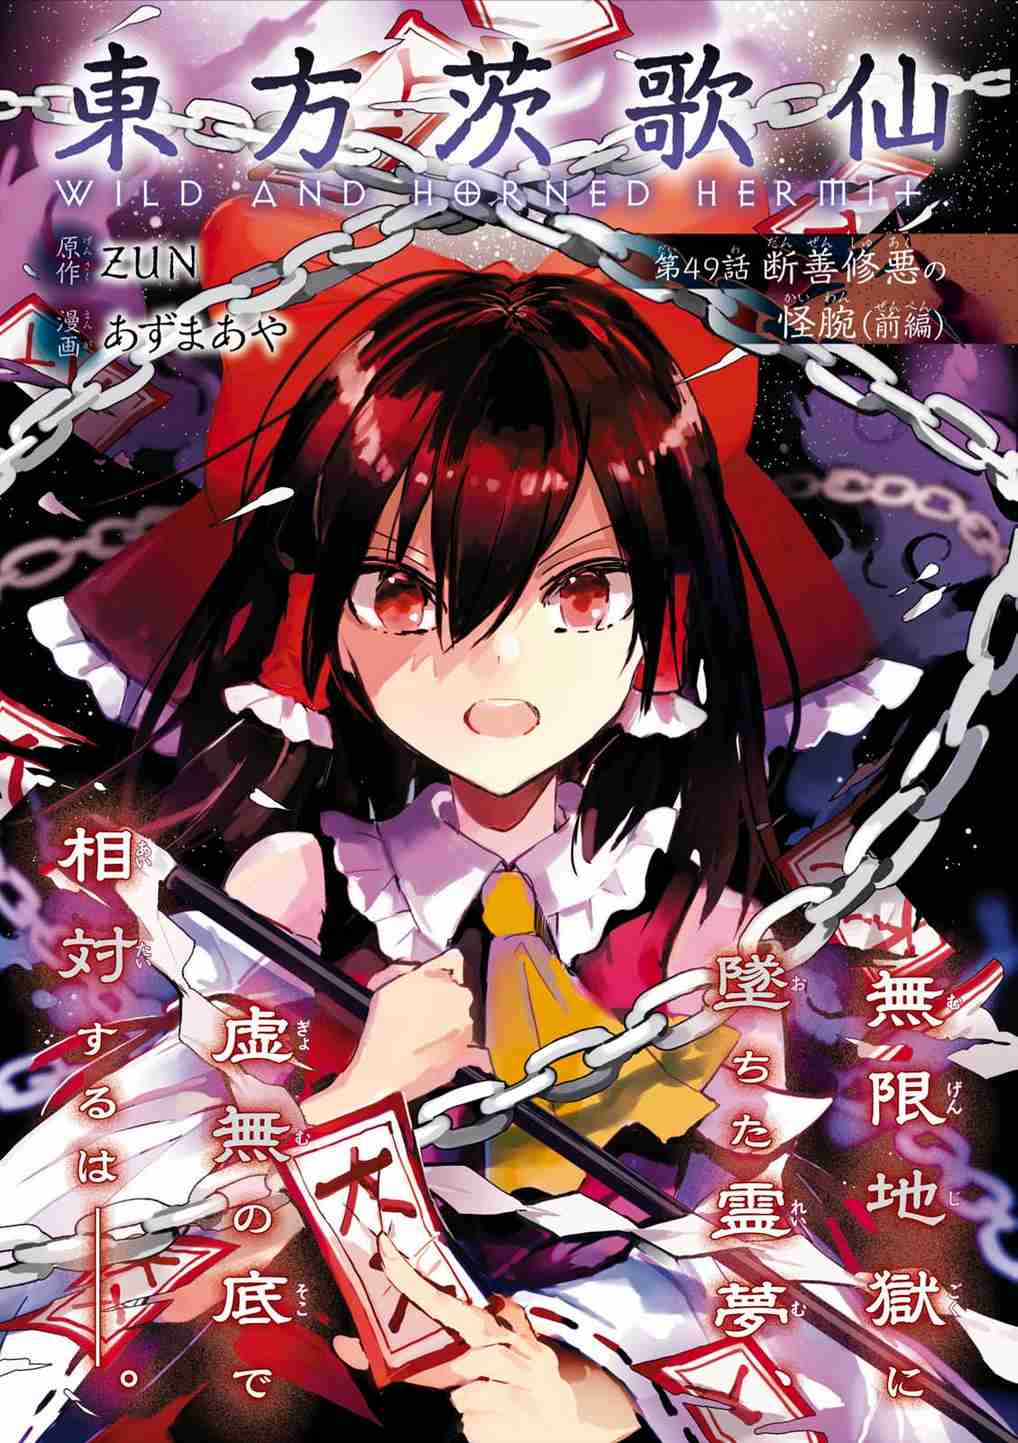 Touhou Ibara Kasen ~ Wild and Horned Hermit. Vol. 10 Ch. 49 The Inhuman Talent Embracing Wickedness (Part 1)